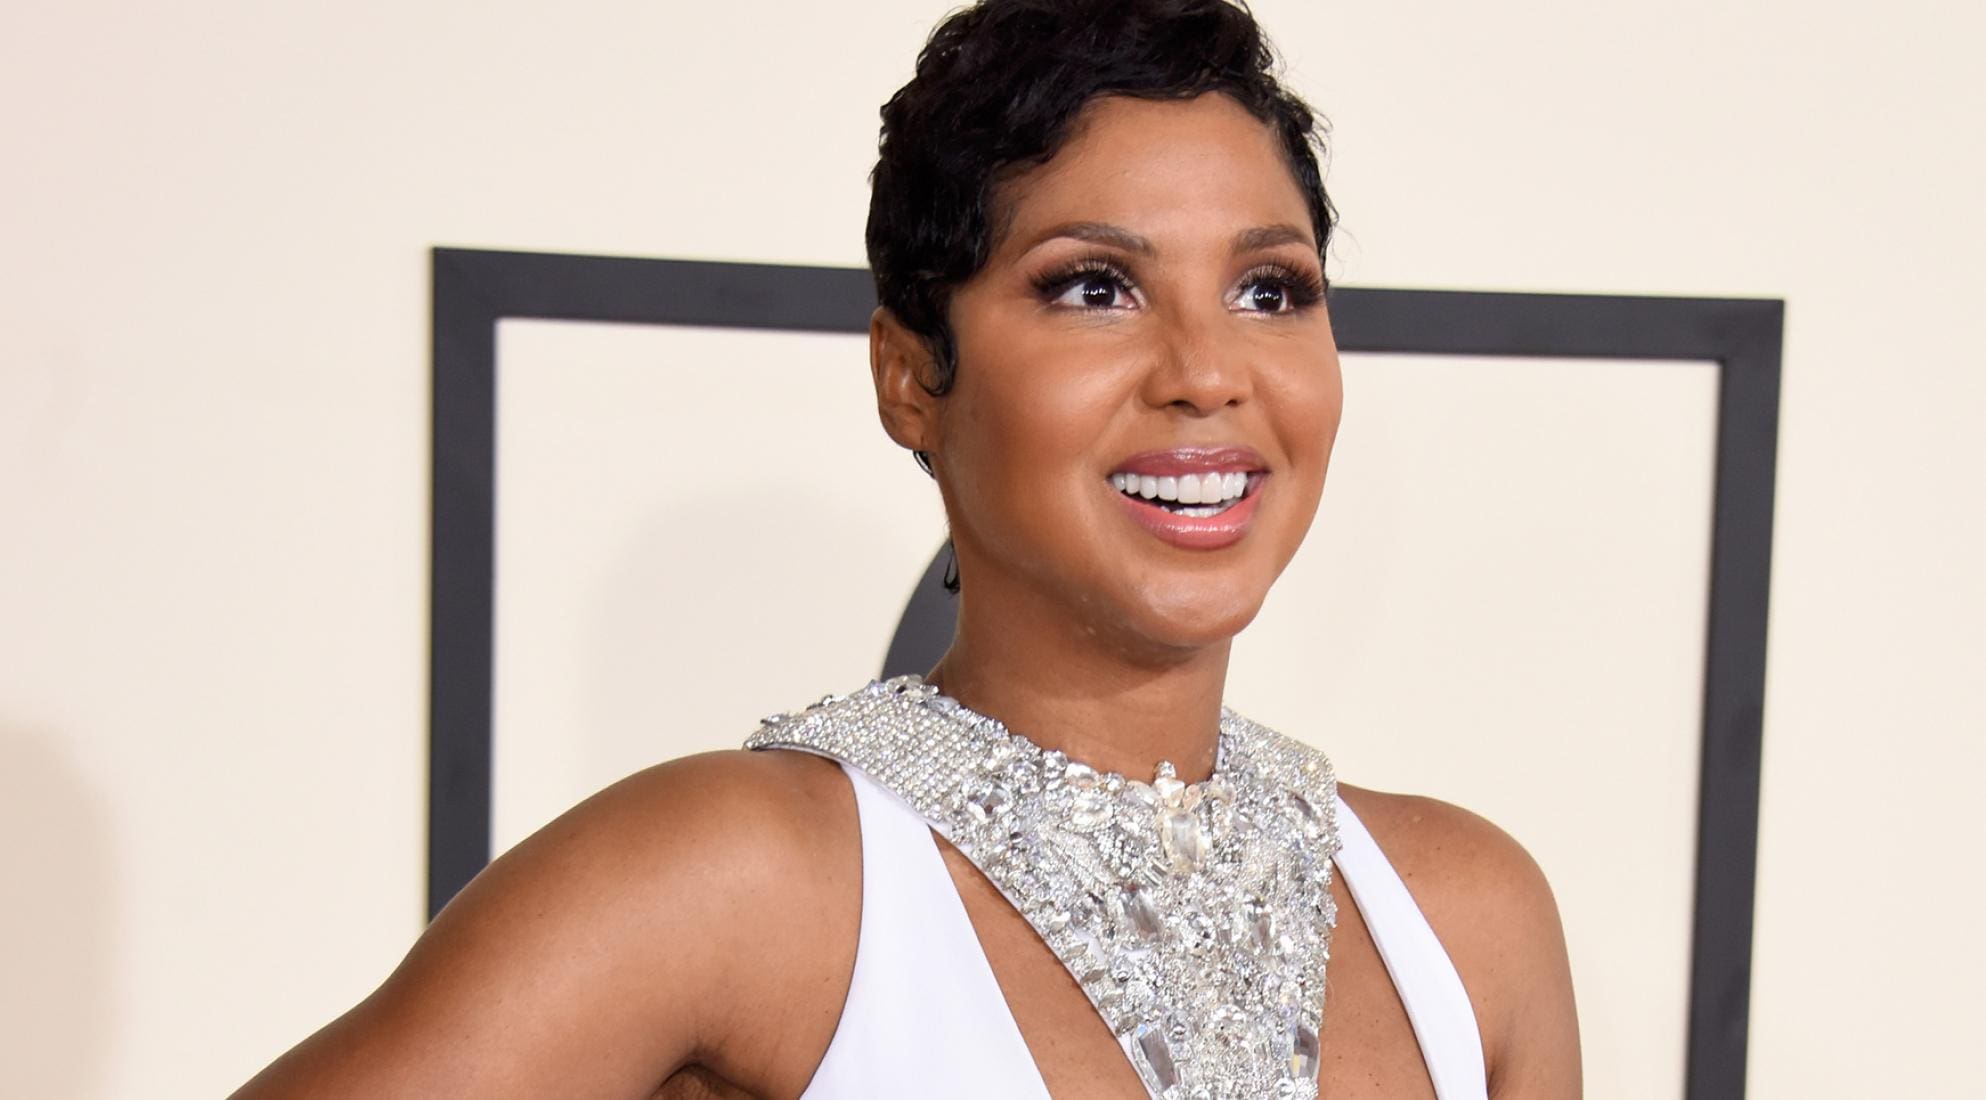 Toni Braxton Gushes Over Her Son, Diezel Braxton-Lewis Who Just Won The Best Young Actor Award